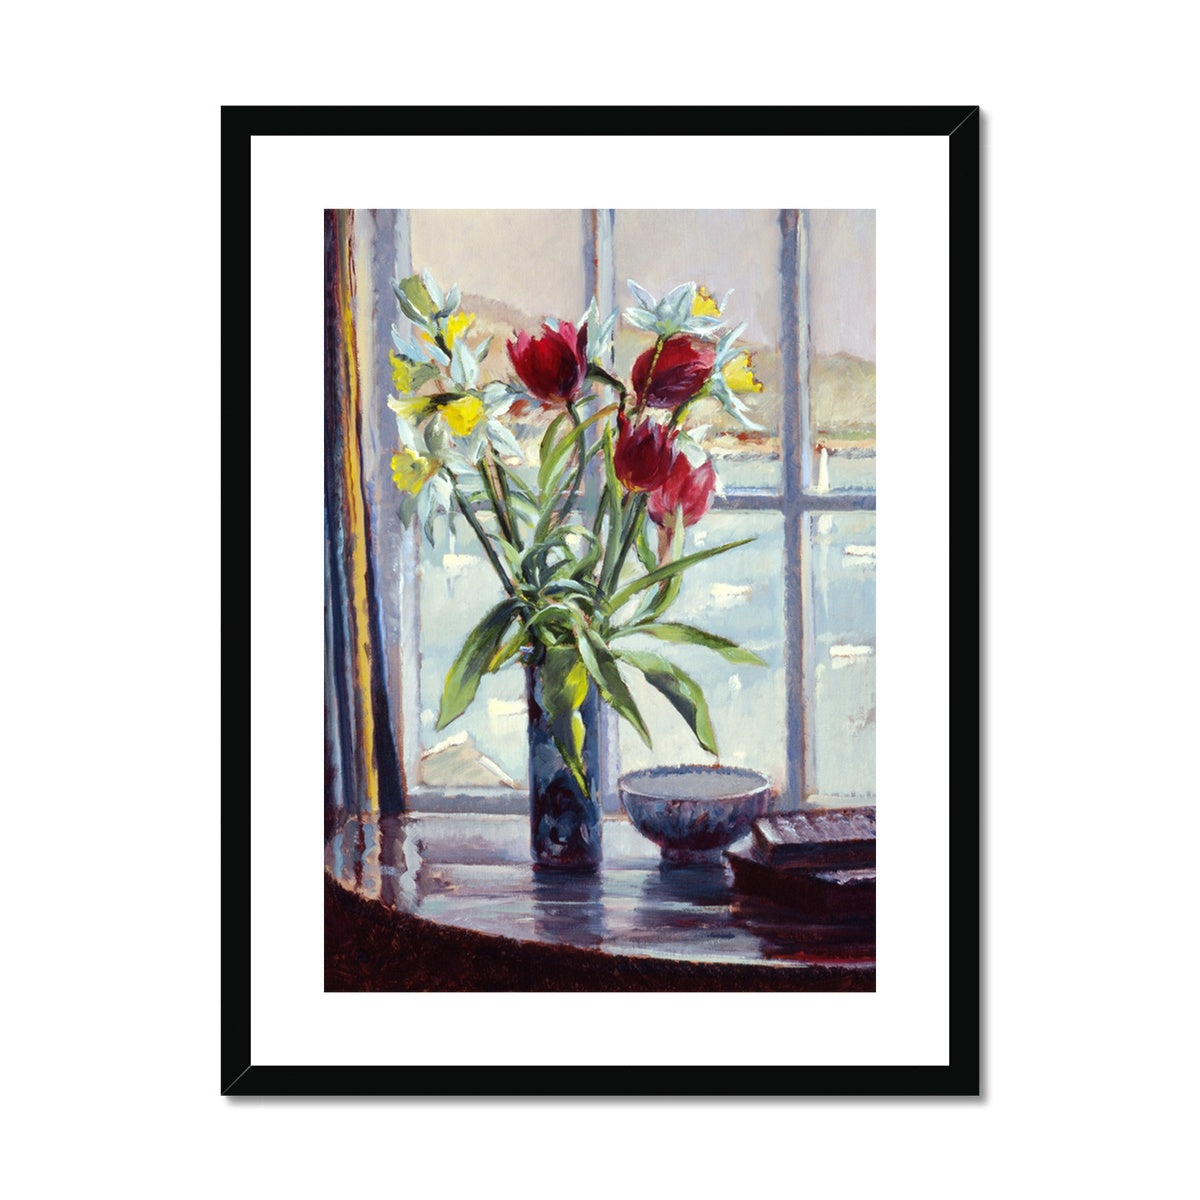 Ted Dyer Framed Open Edition Cornish Fine Art Print. 'Daffodils and Tulips in a Vase, Still Life'. Cornwall Art Gallery